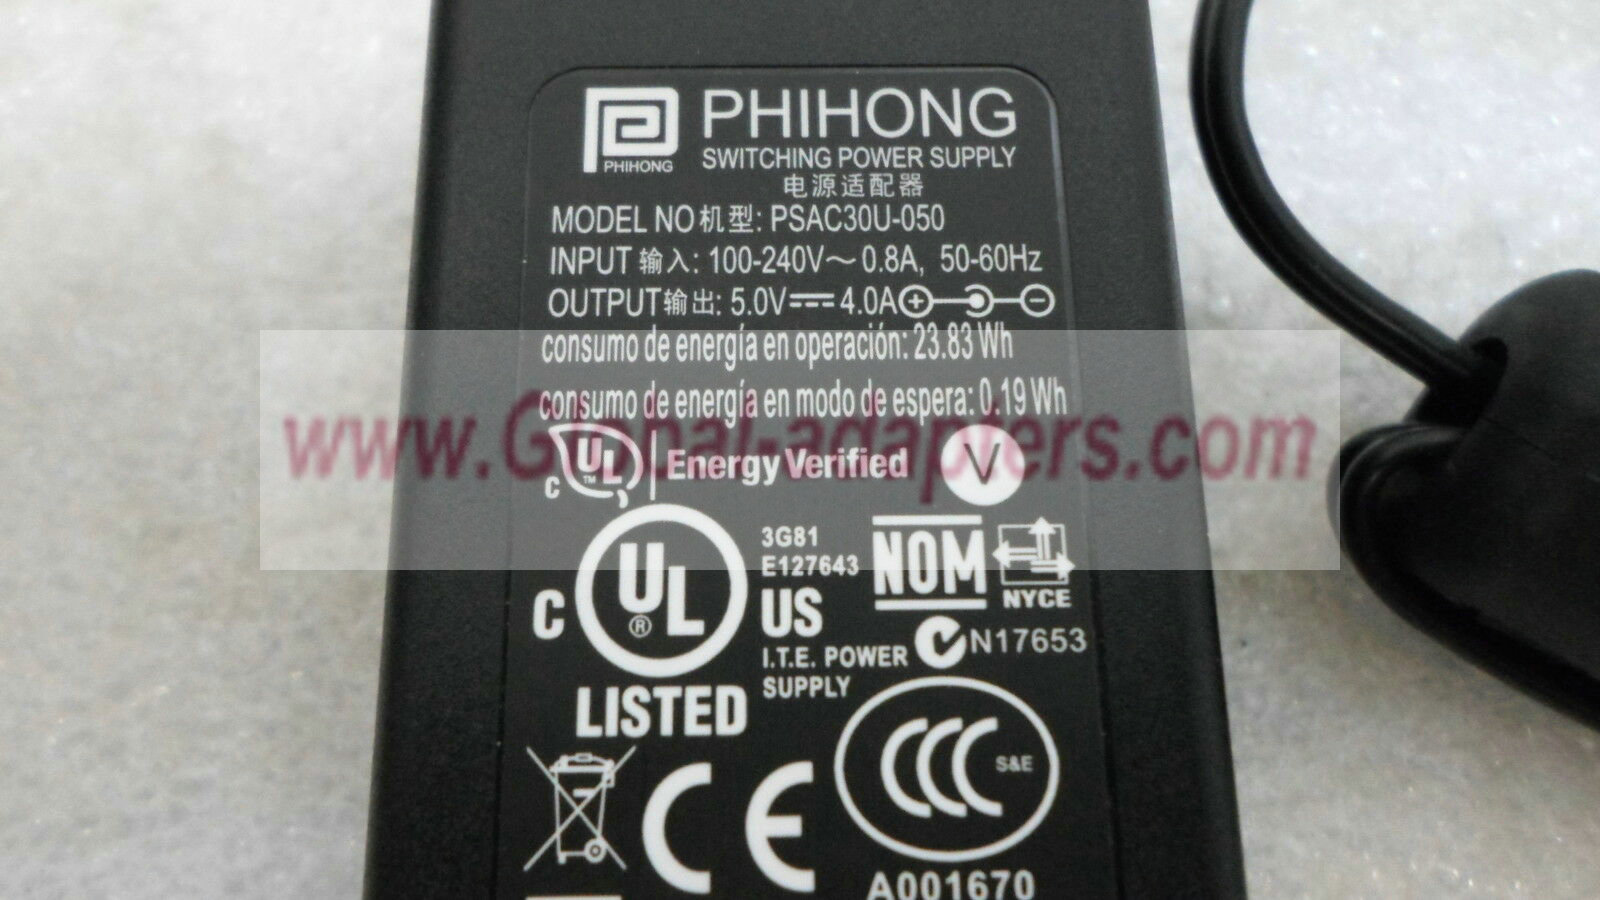 NEW 5V 4A Phihong PSAC30U-050 Switching Power Supply AC Adapter